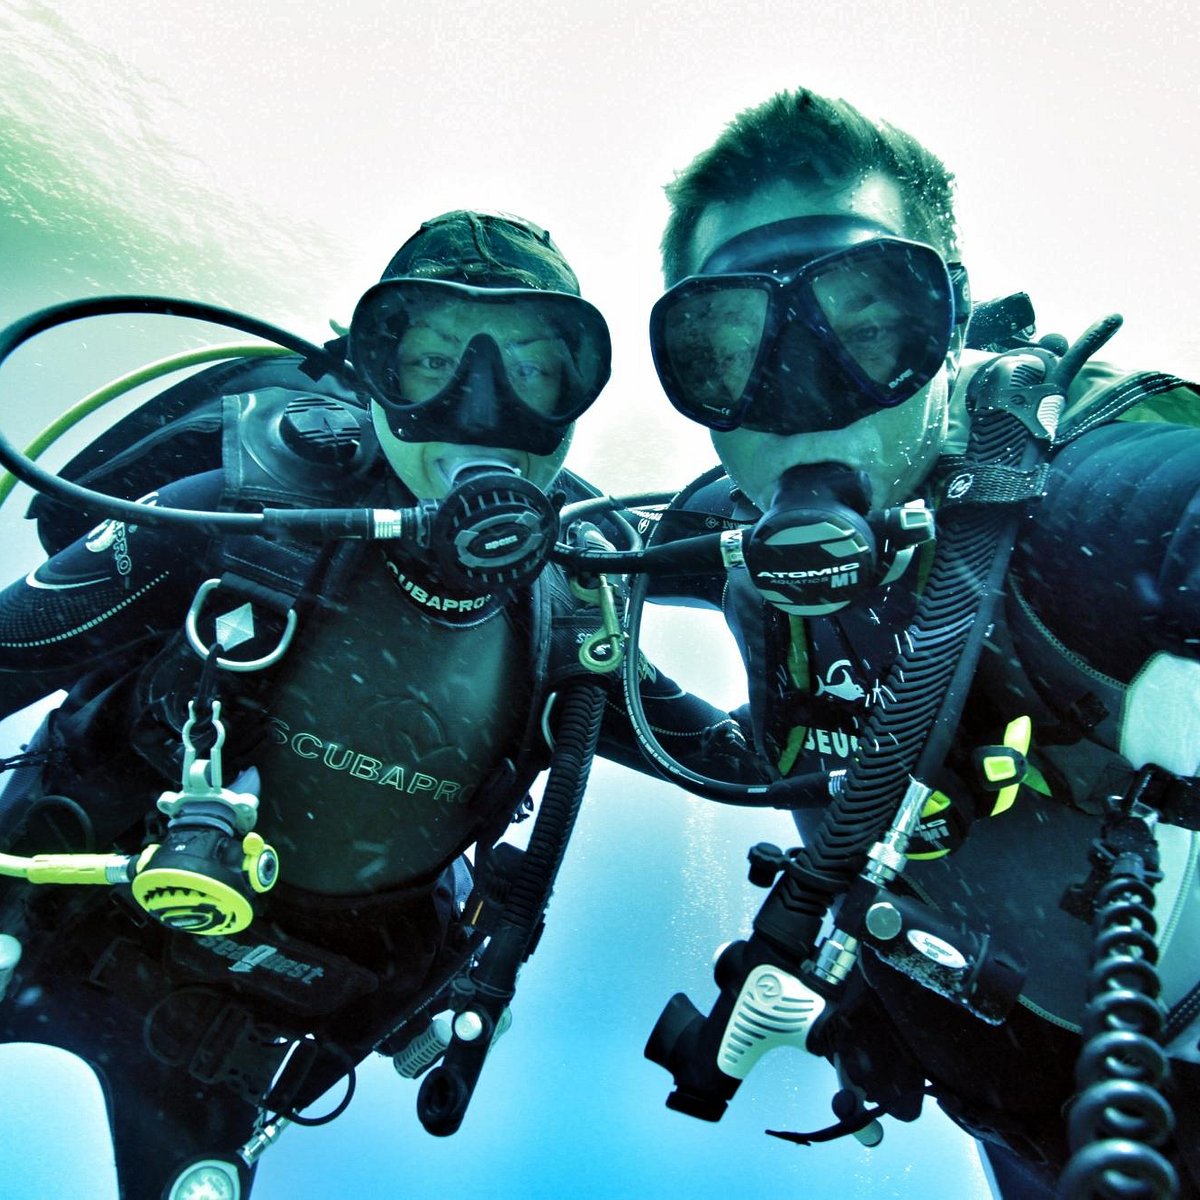 Diving Solo: Yes or No?